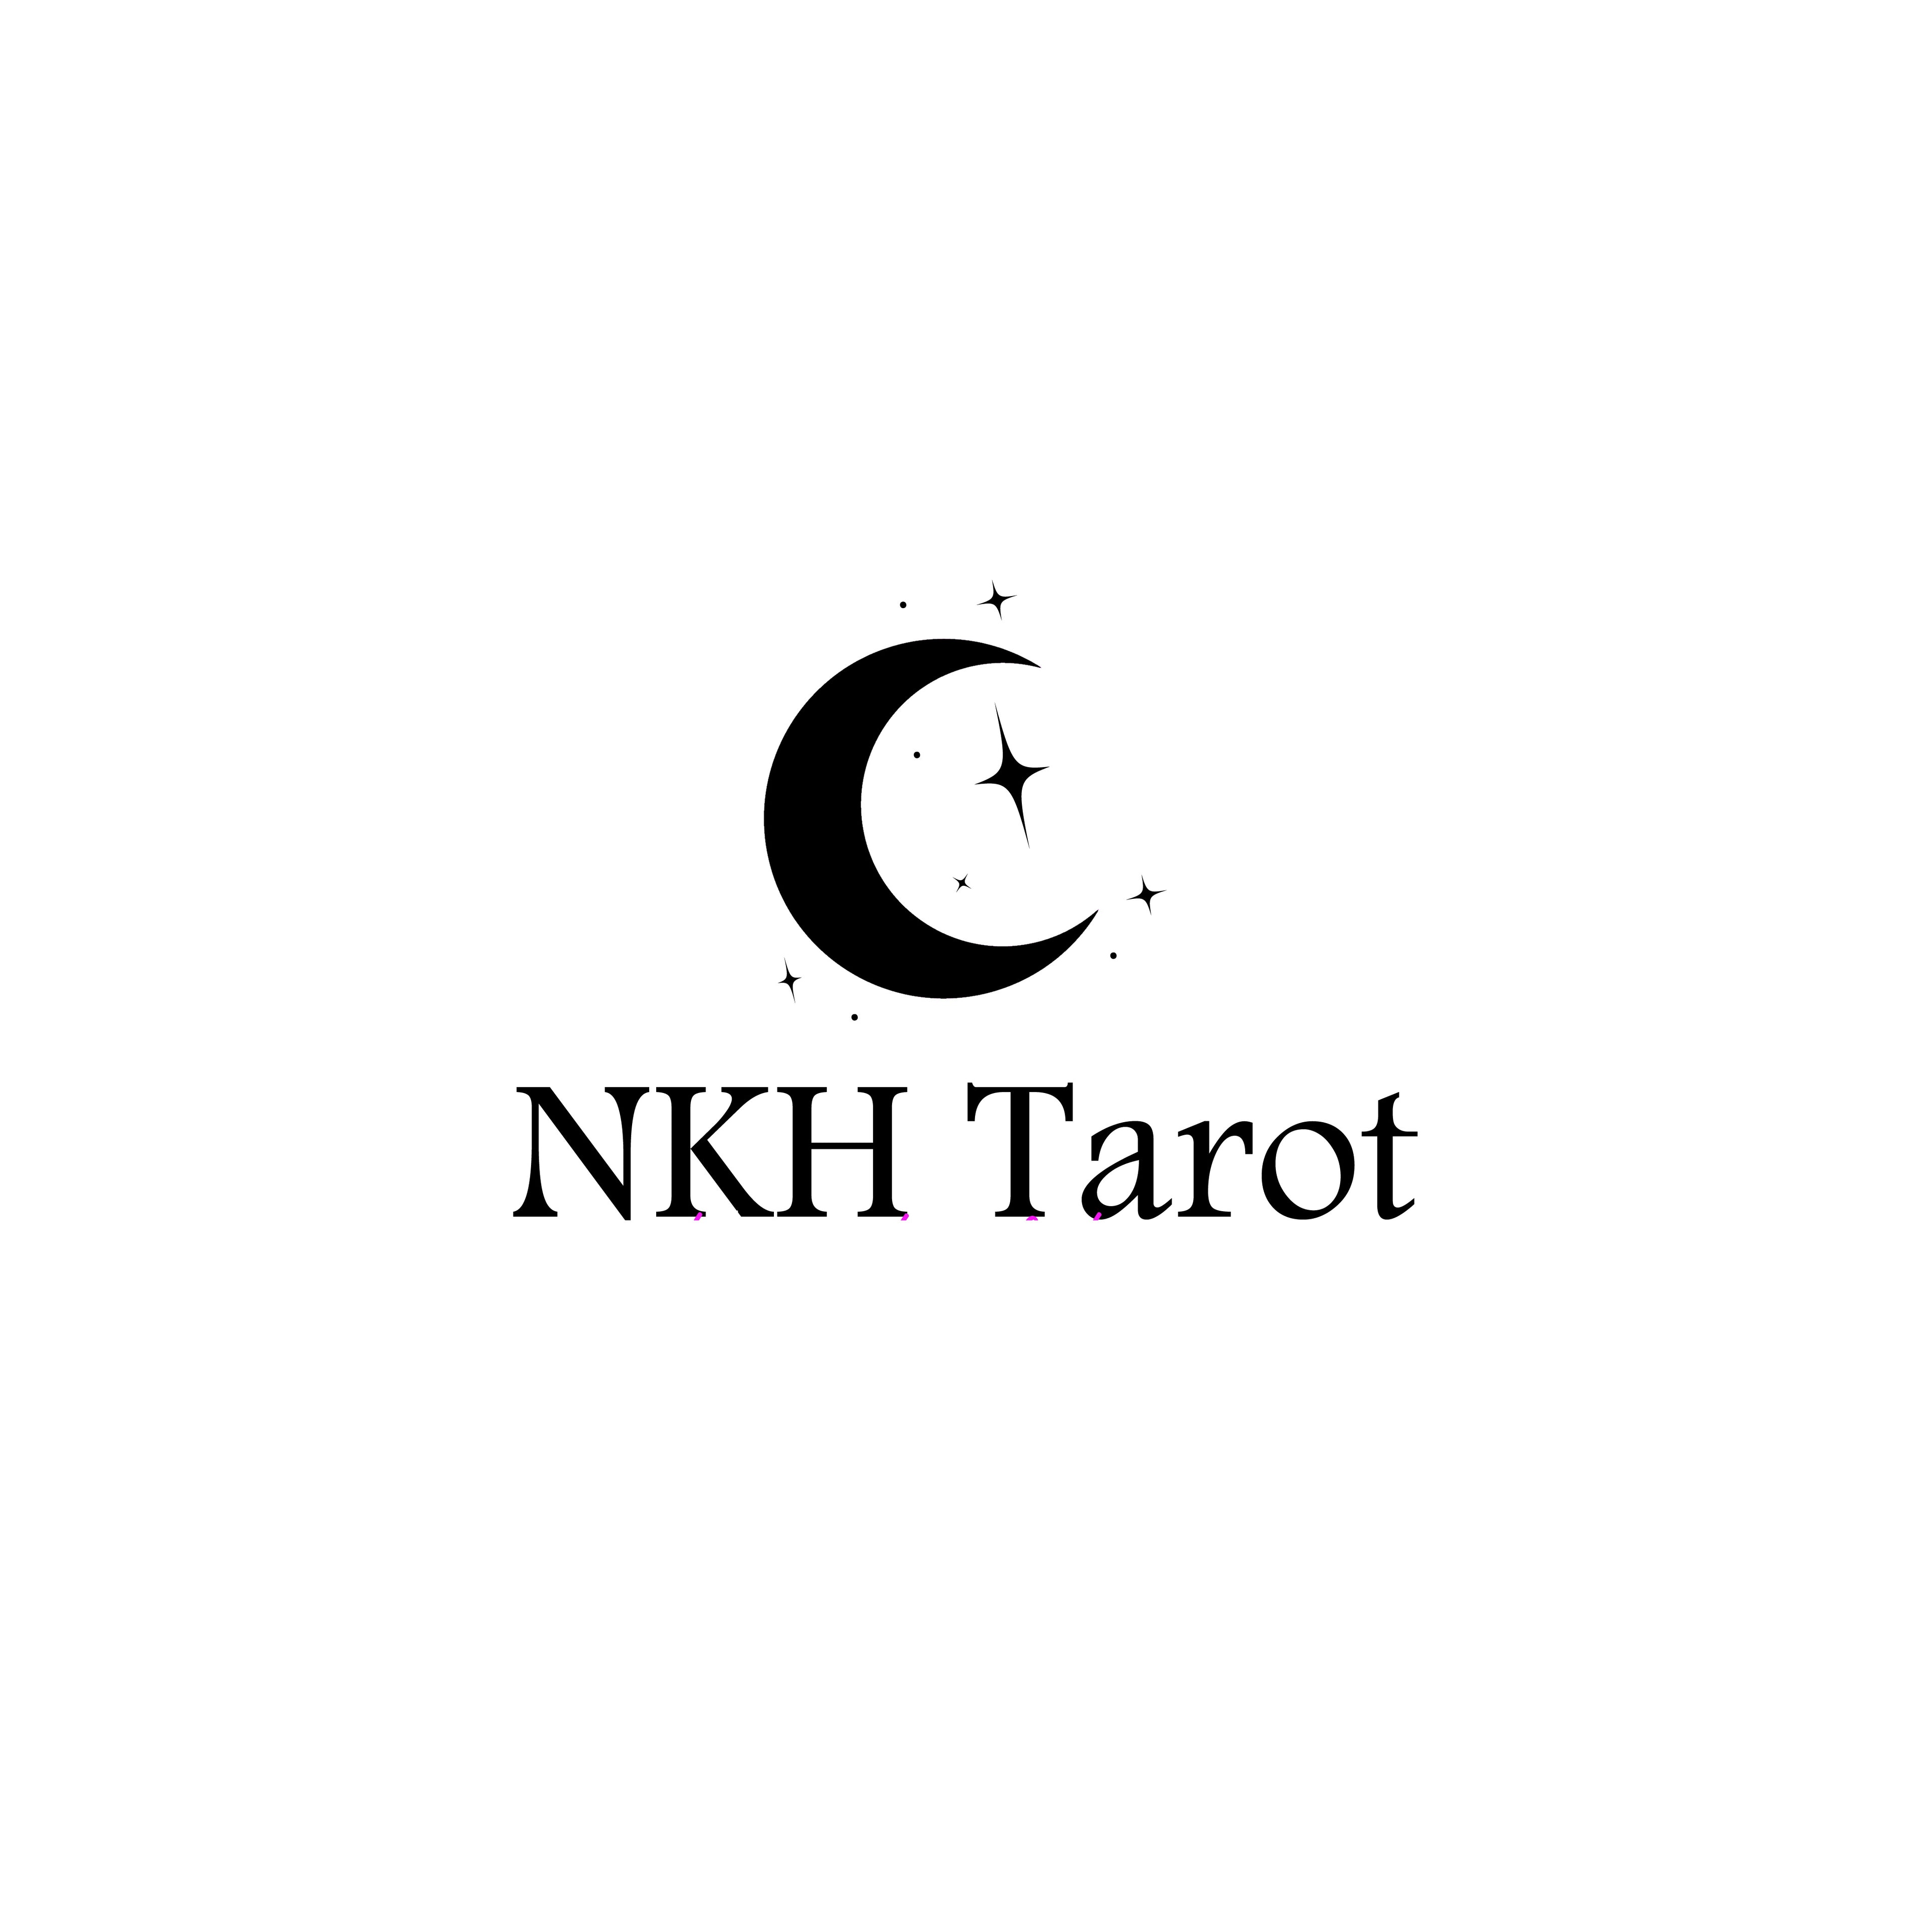 Load video: Video about Small Business NKH Tarot